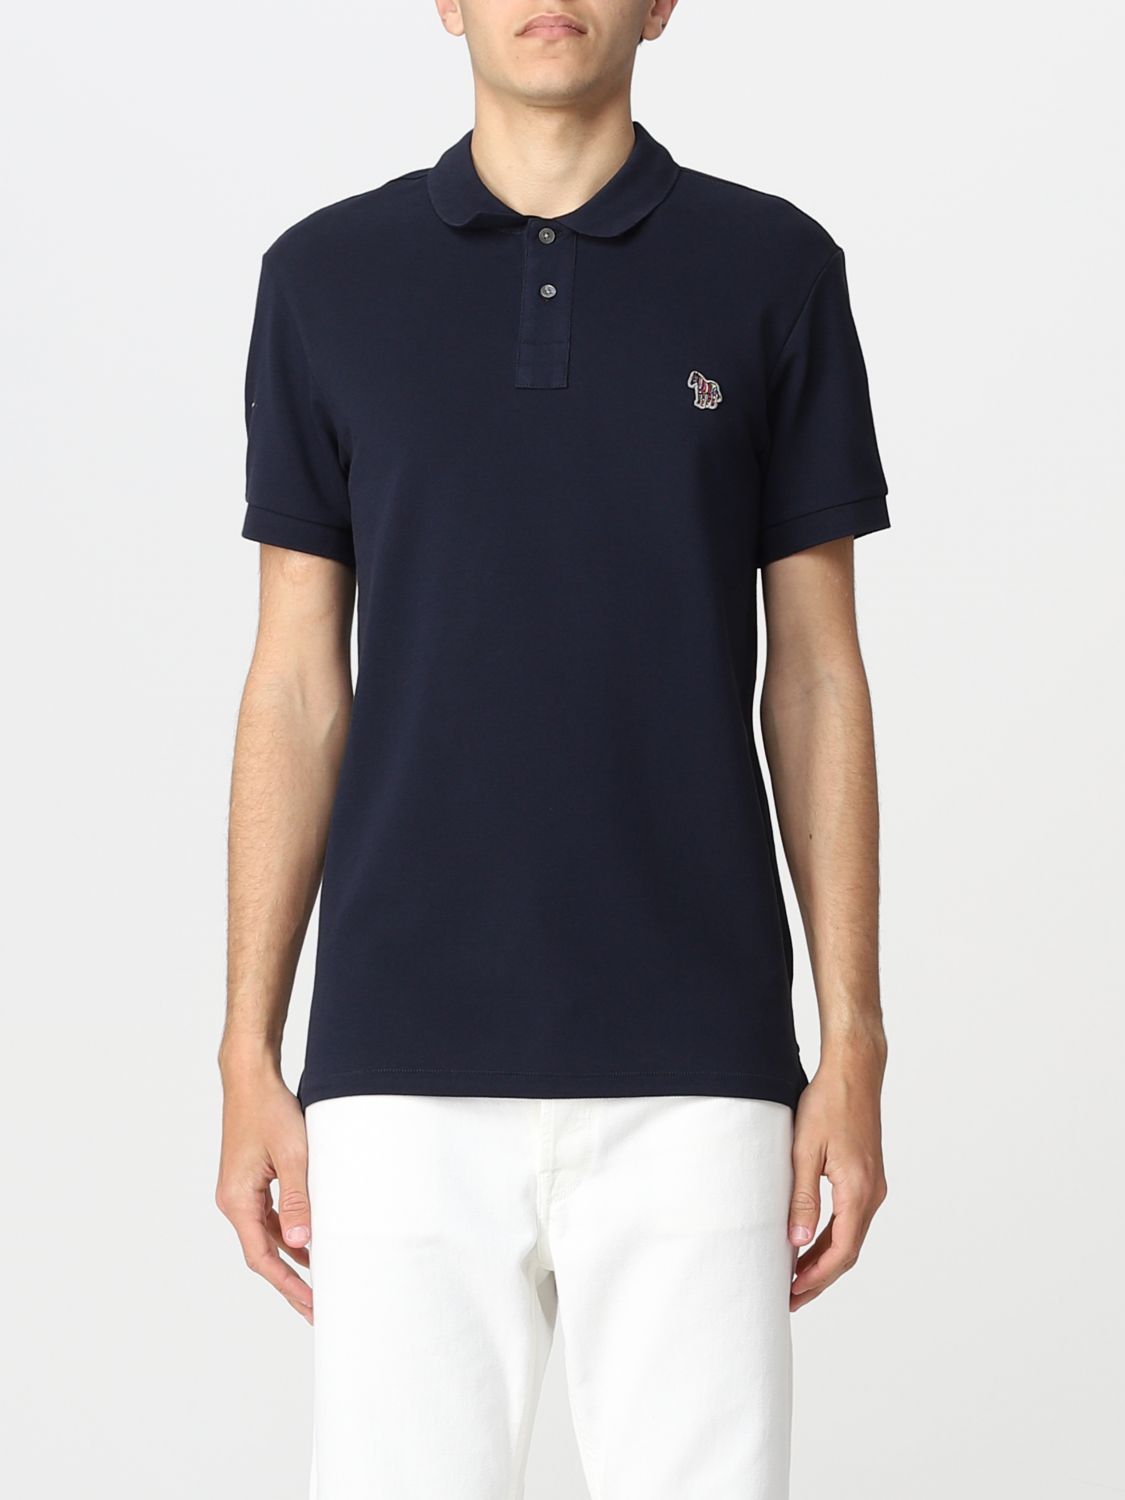 PS by Paul Smith Zebra Polo Summer Collection Men